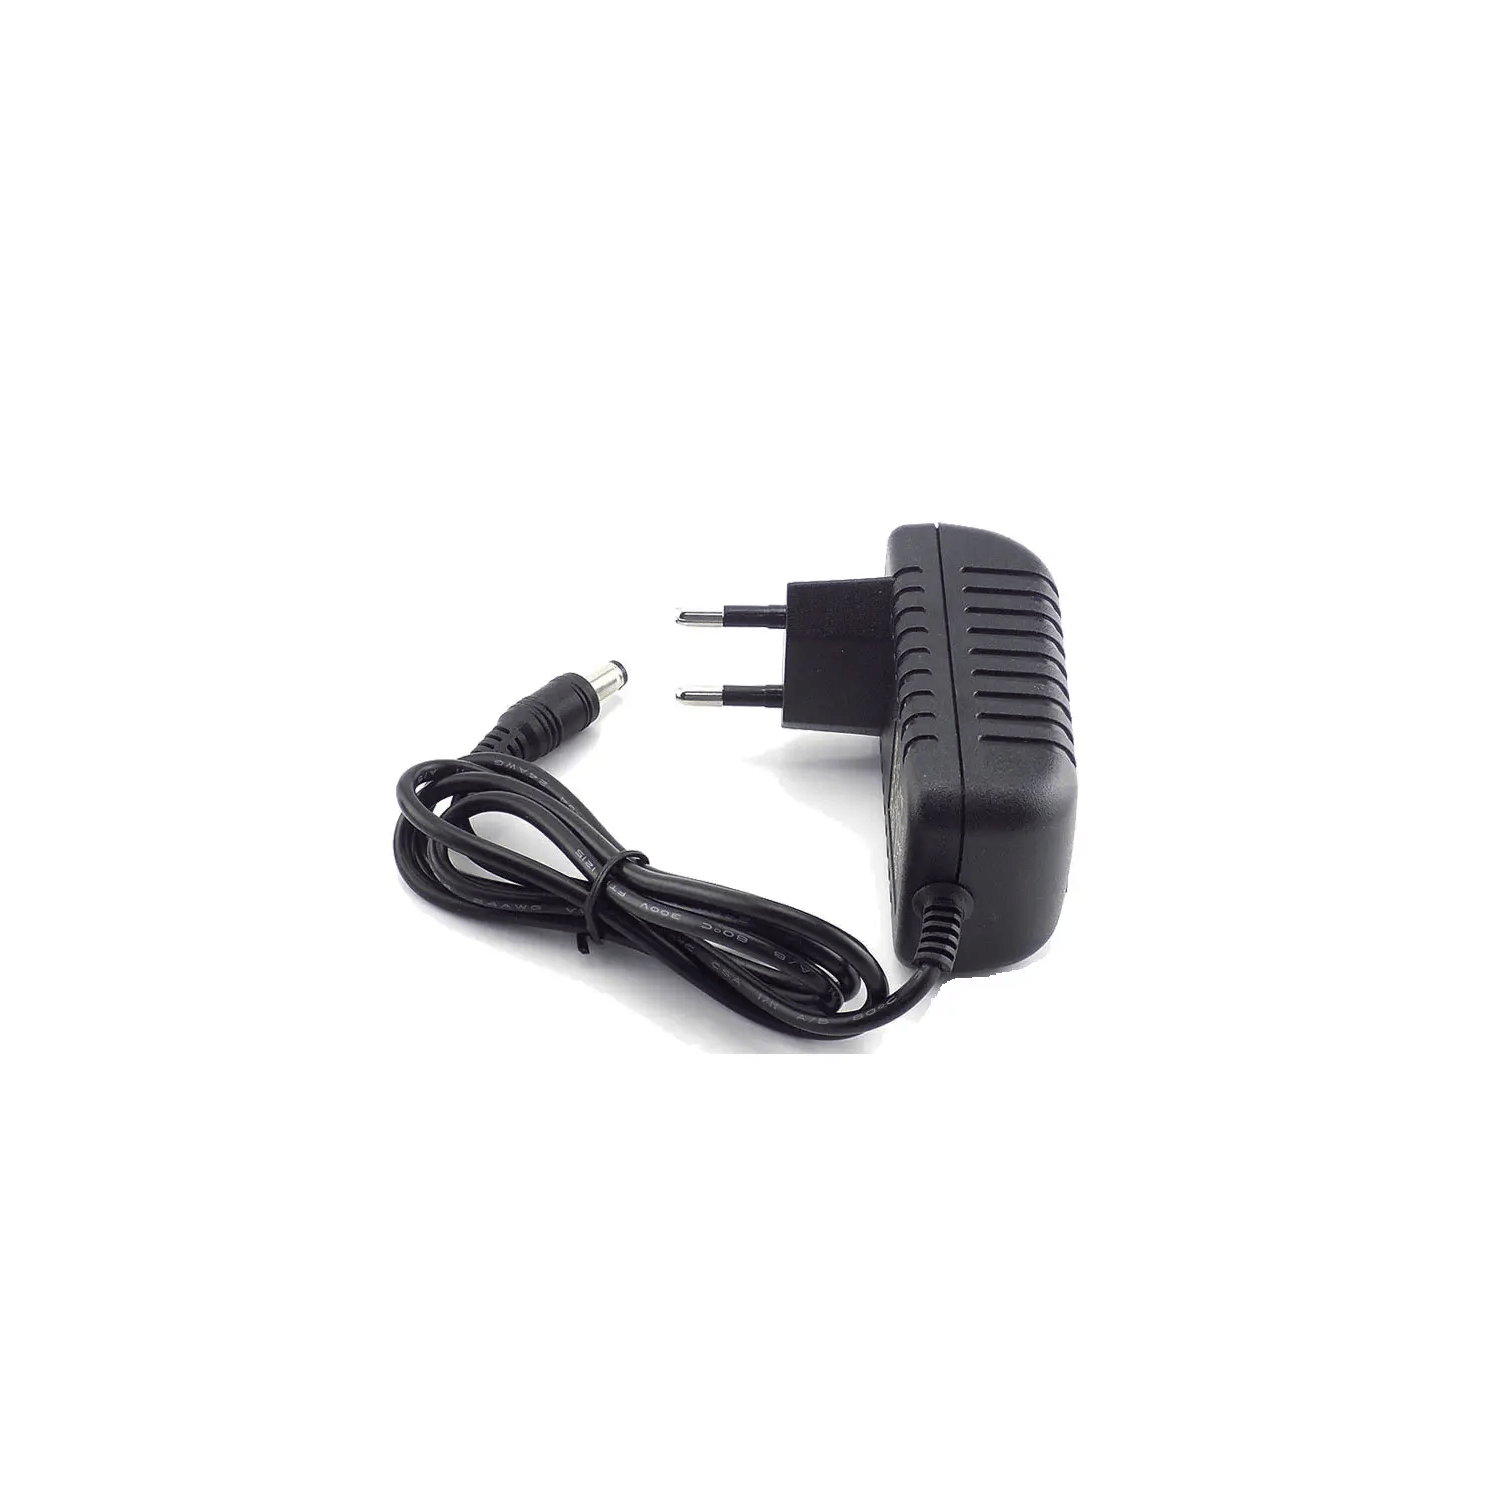 AC adapter 24V / 1A / 24W, reversible, with 1.5 m cable